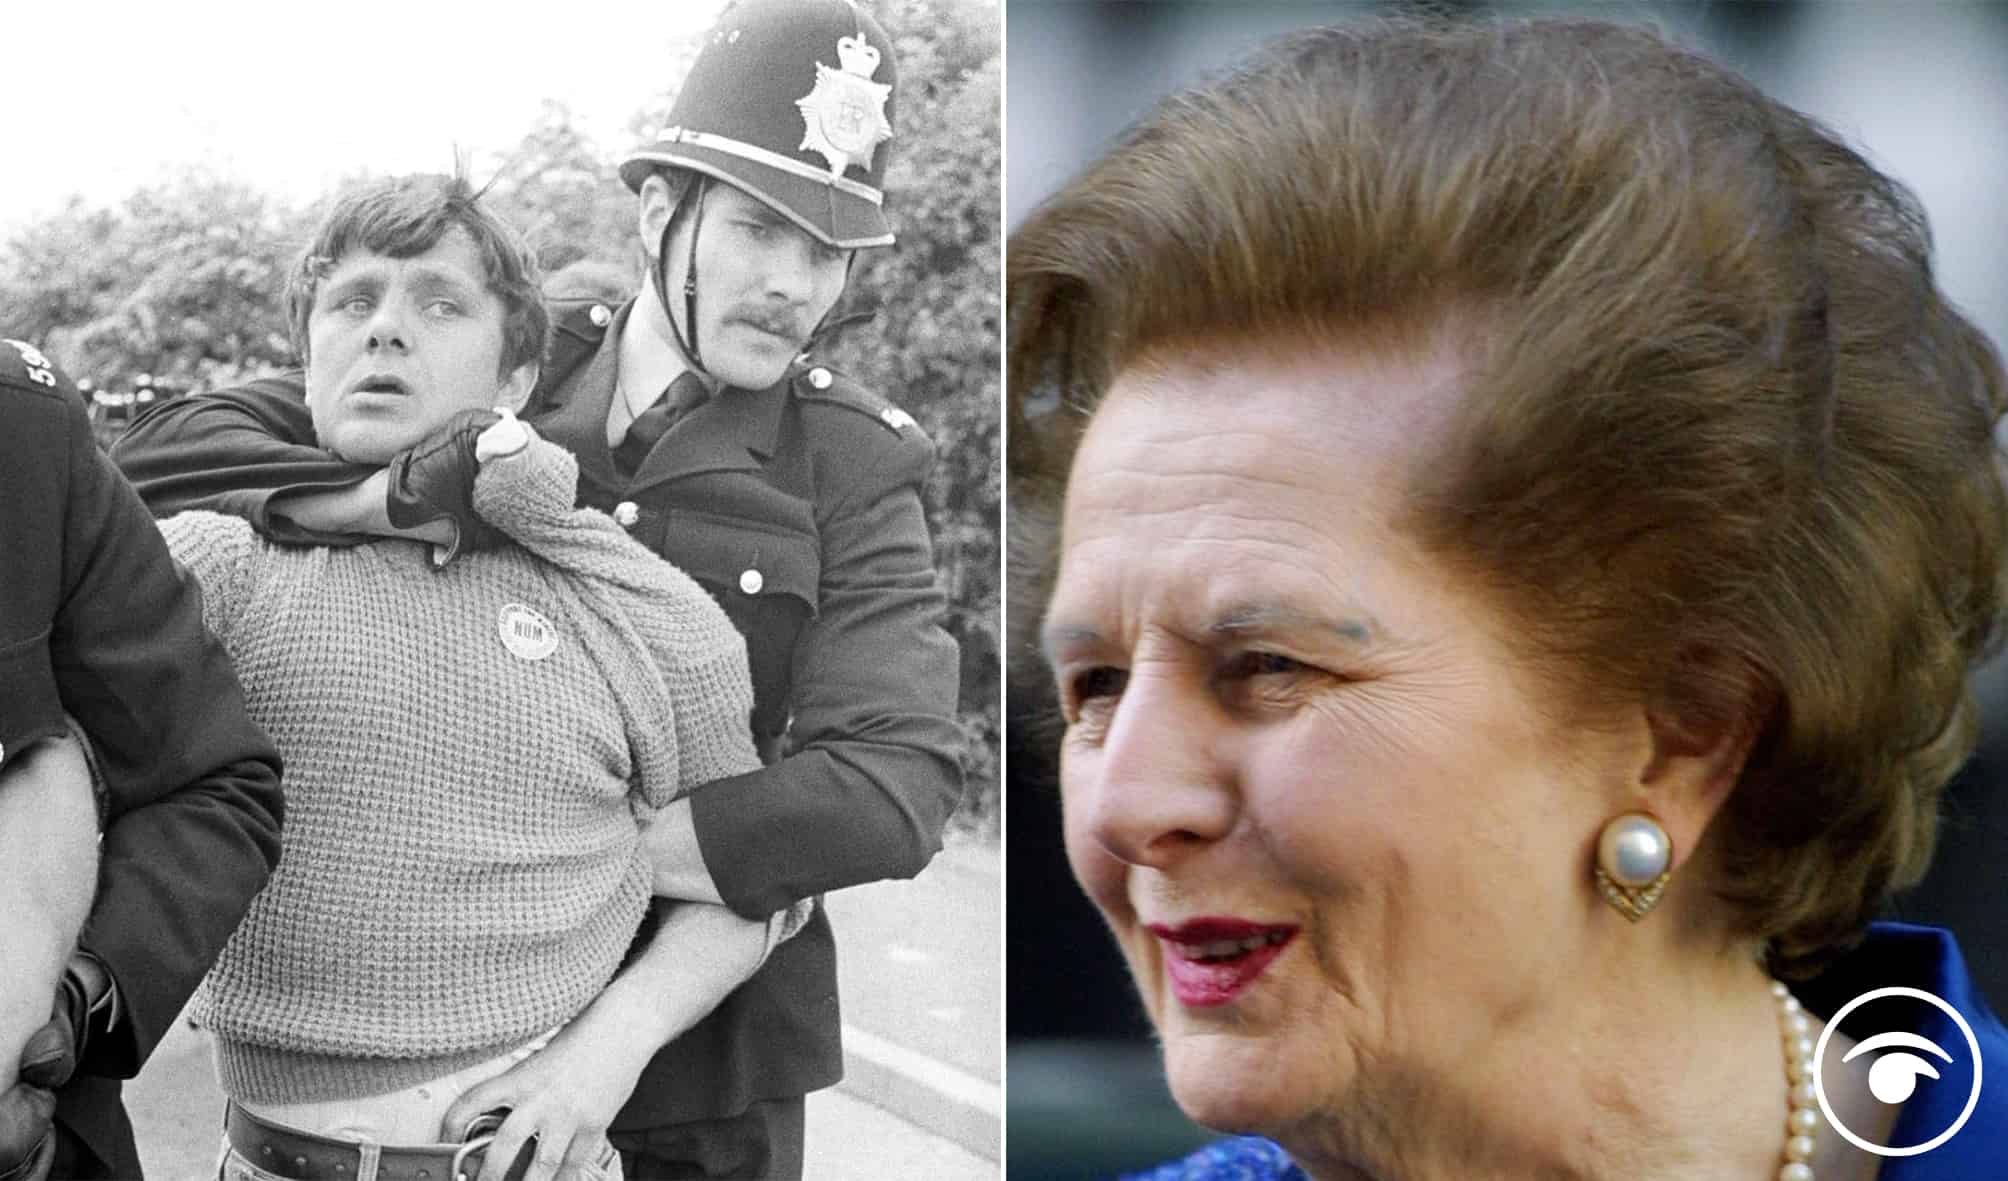 Coal Mines: Fury as PM says Thatcher gave UK ‘early start’ in battling climate change by closing pits